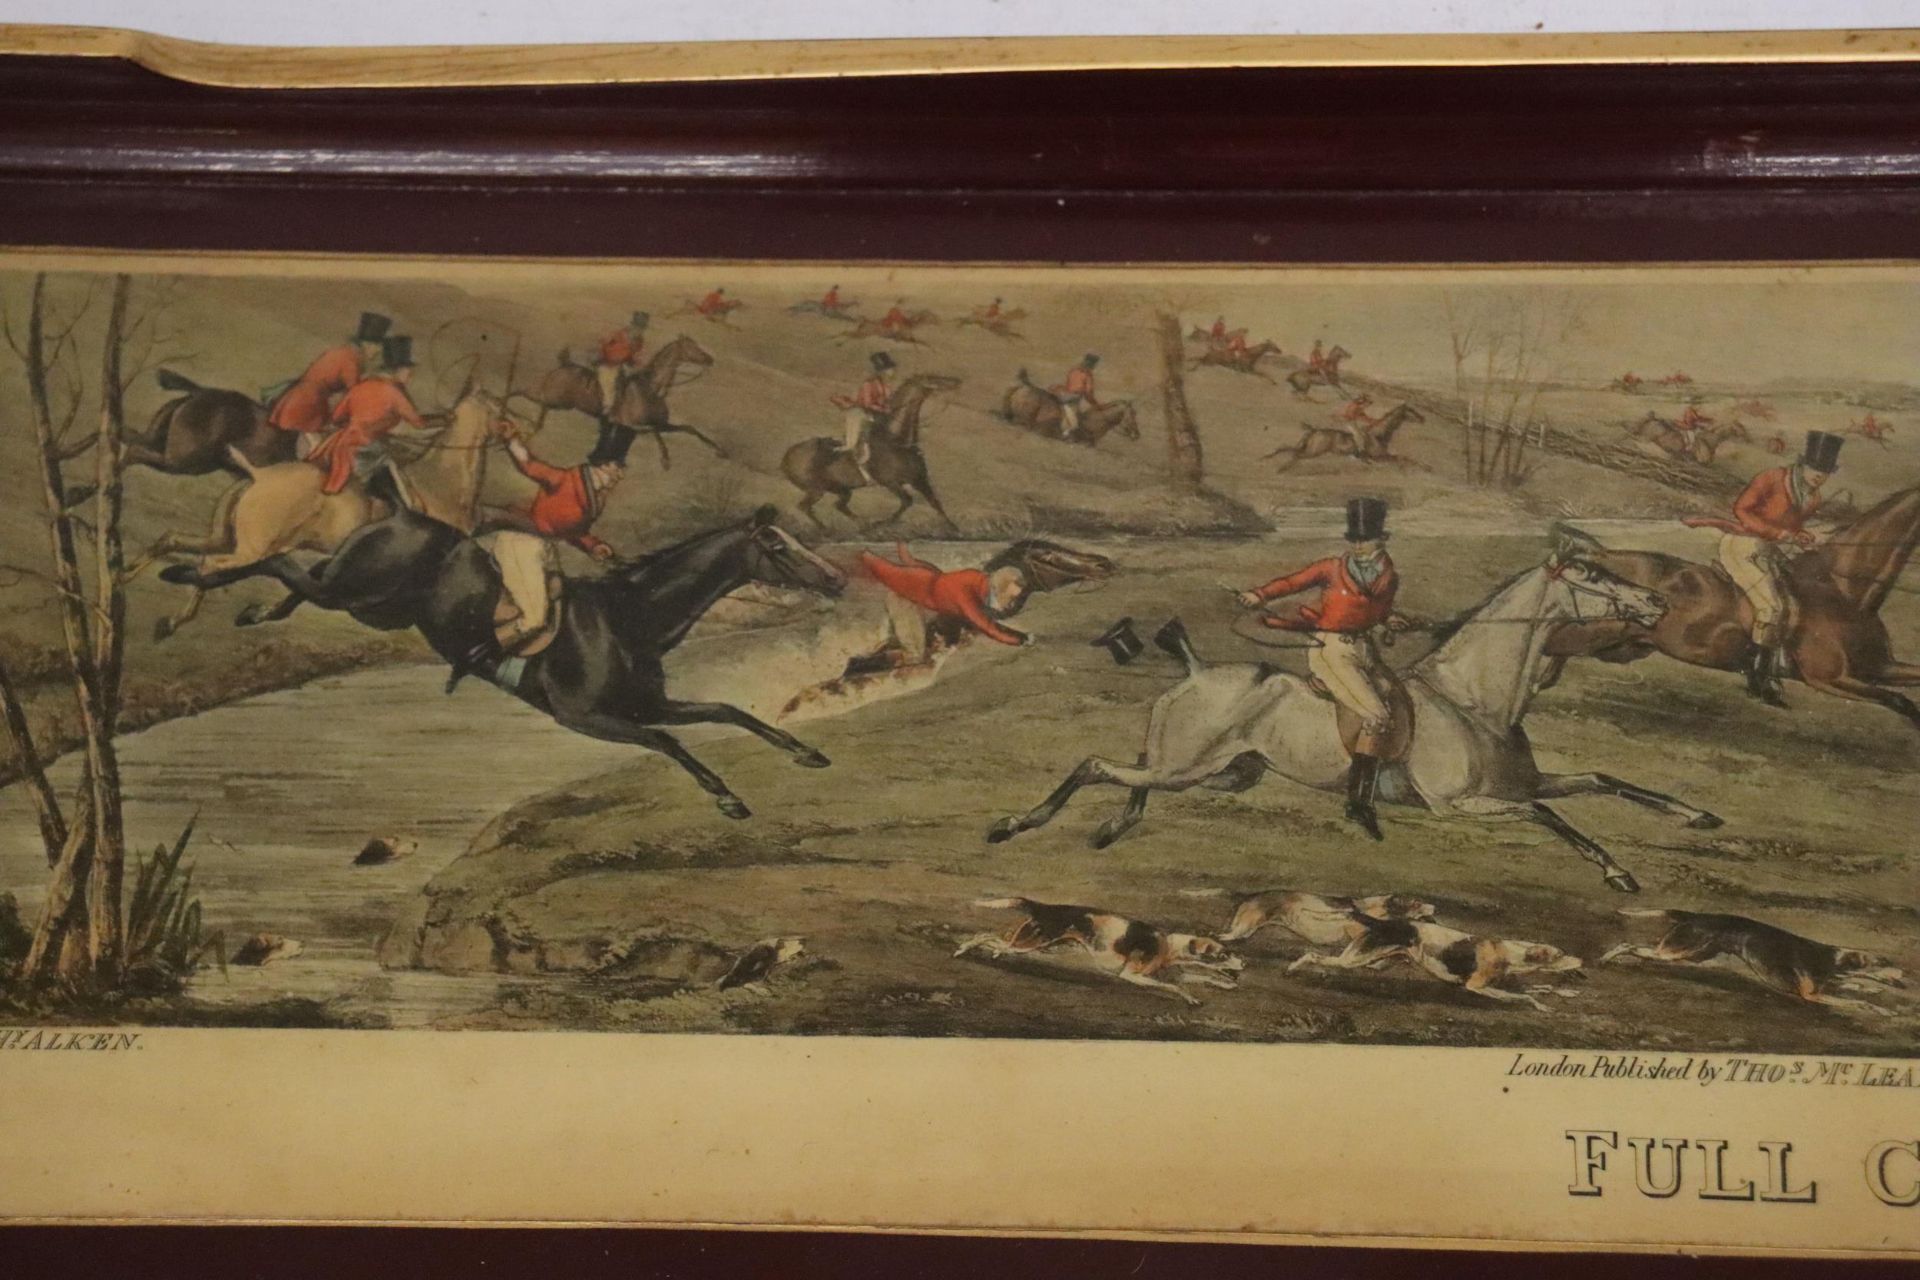 AN OBLONG LACQUERED TRAY ENTITLED "FULL CRY" HUNTING SCENE - 67.5 X 23CM - Image 4 of 6